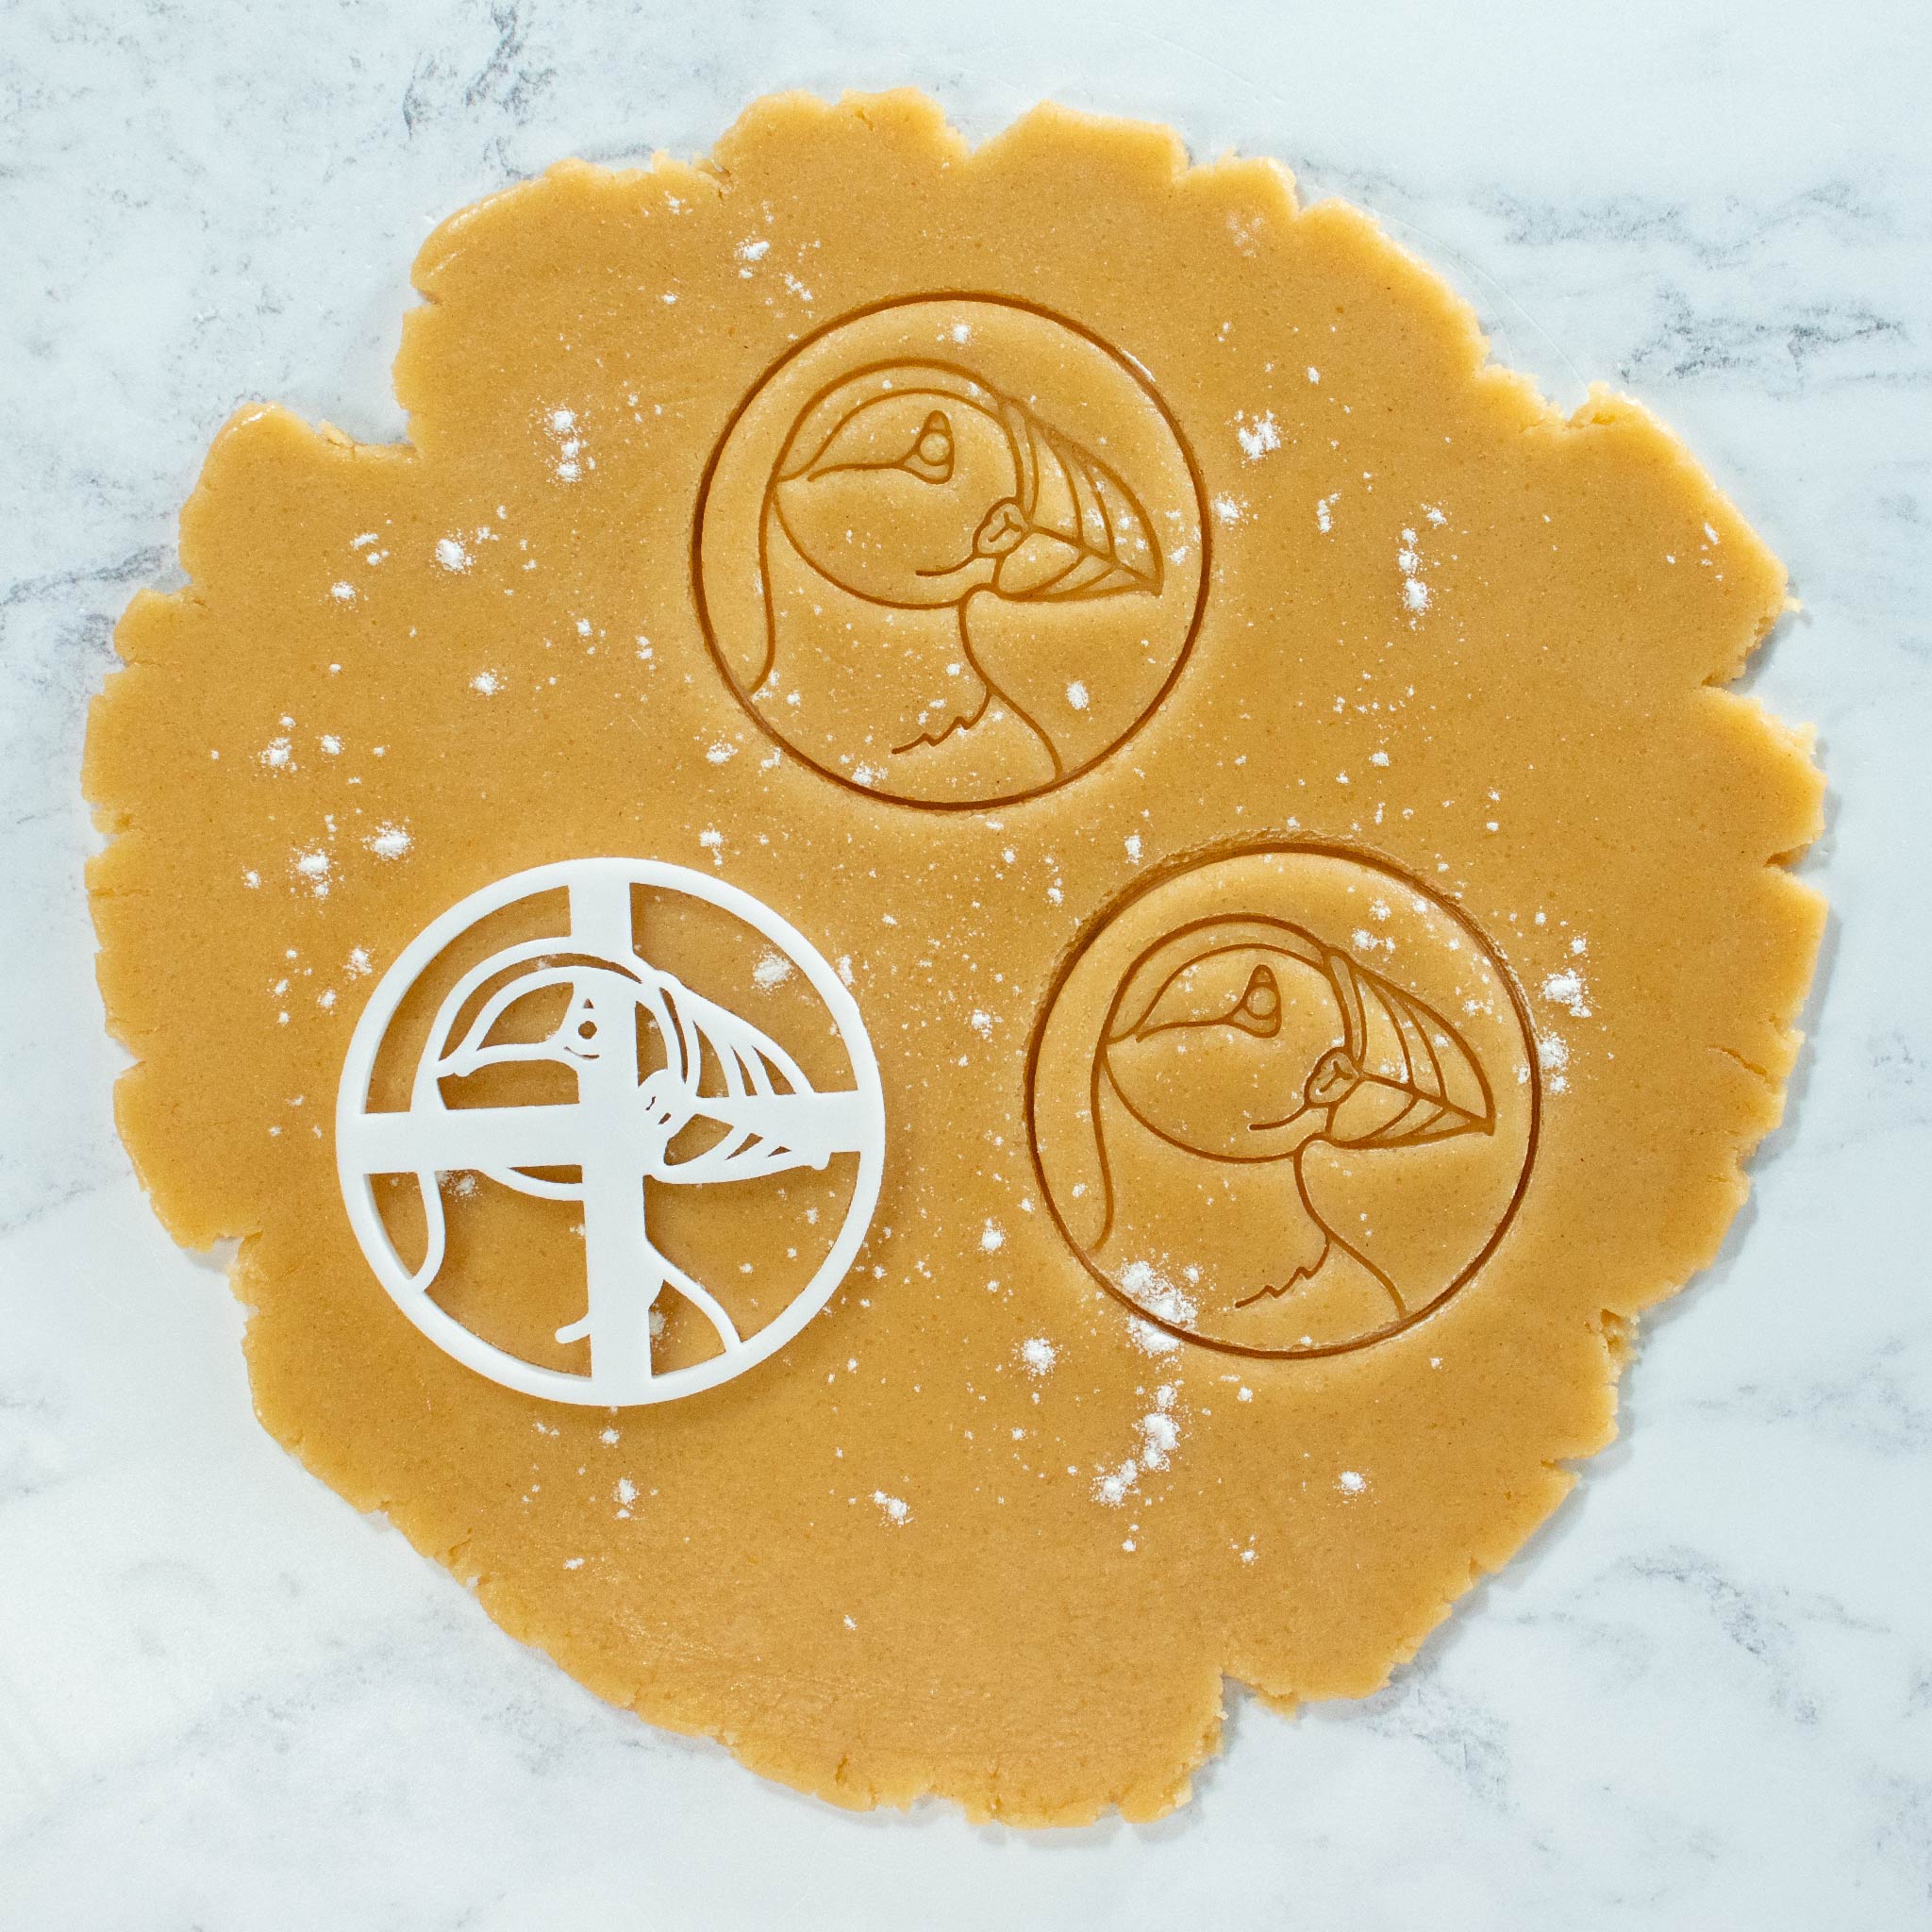 BAKERLOGY Puffin cookie dough cutouts with puffin cookie cutter